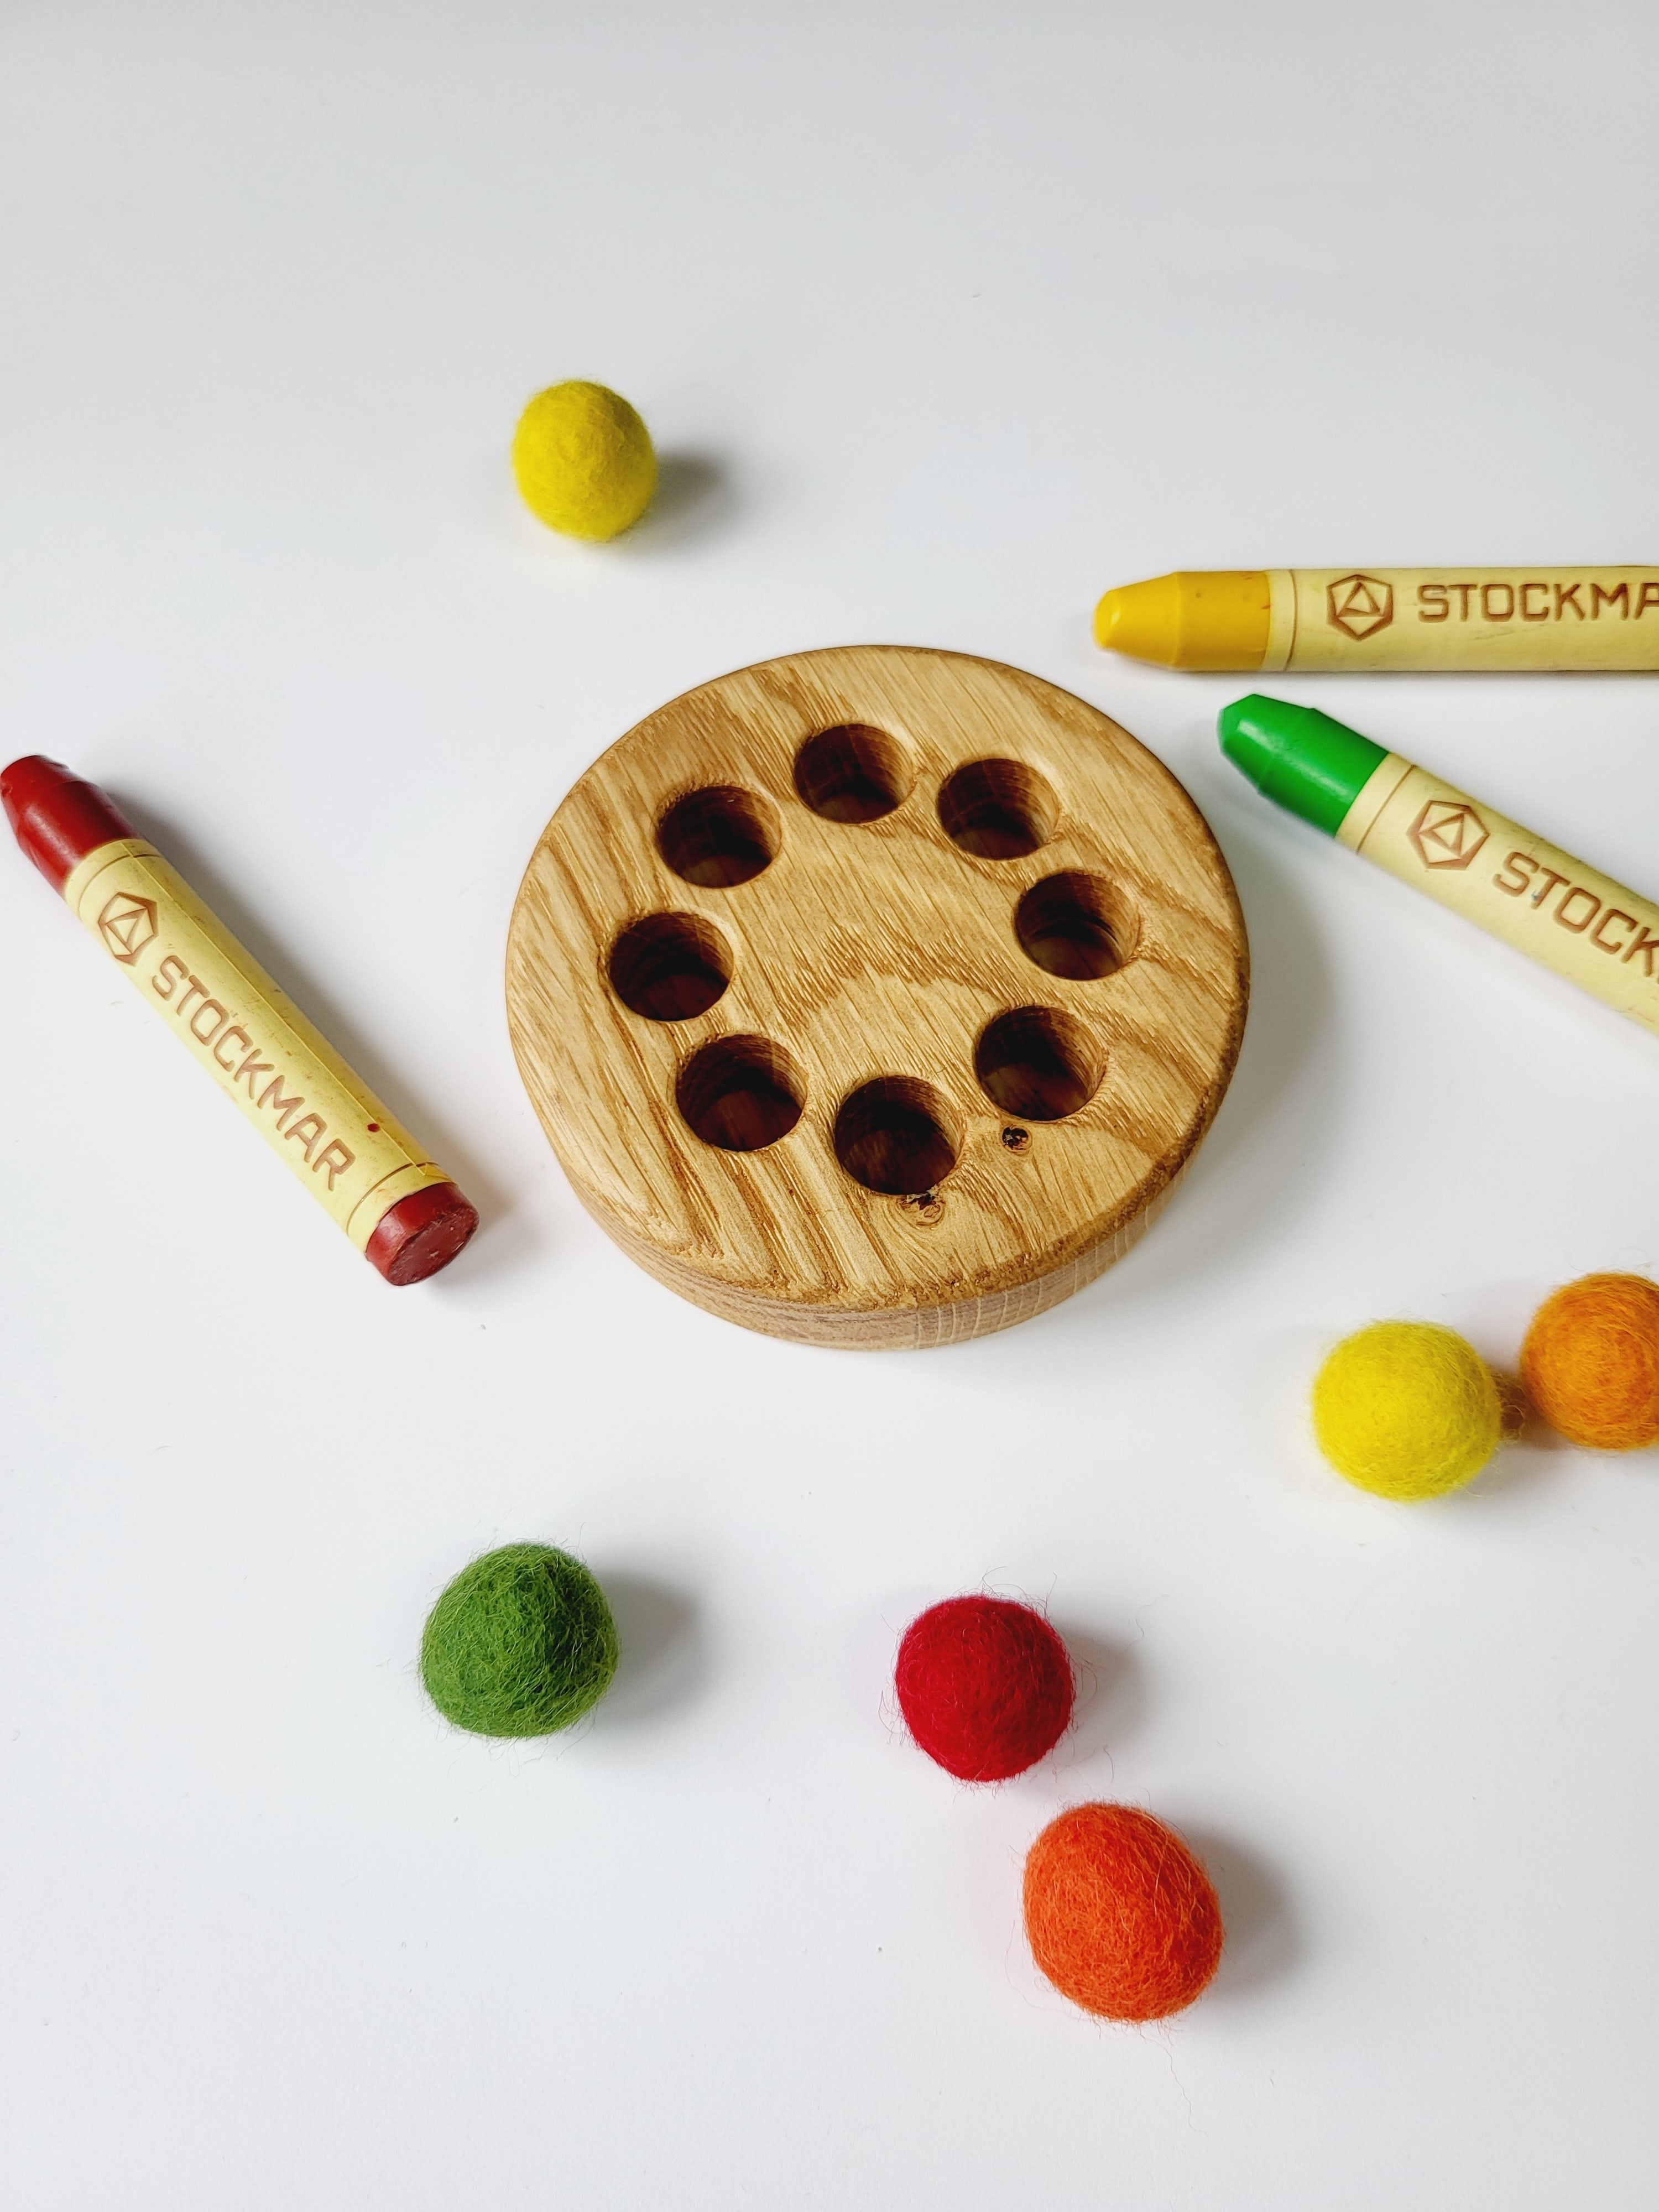 Stockmar crayon holder for 8 sticks, desk organization waldorf crayon holder,  personalized gift for kids wooden holder without crayons